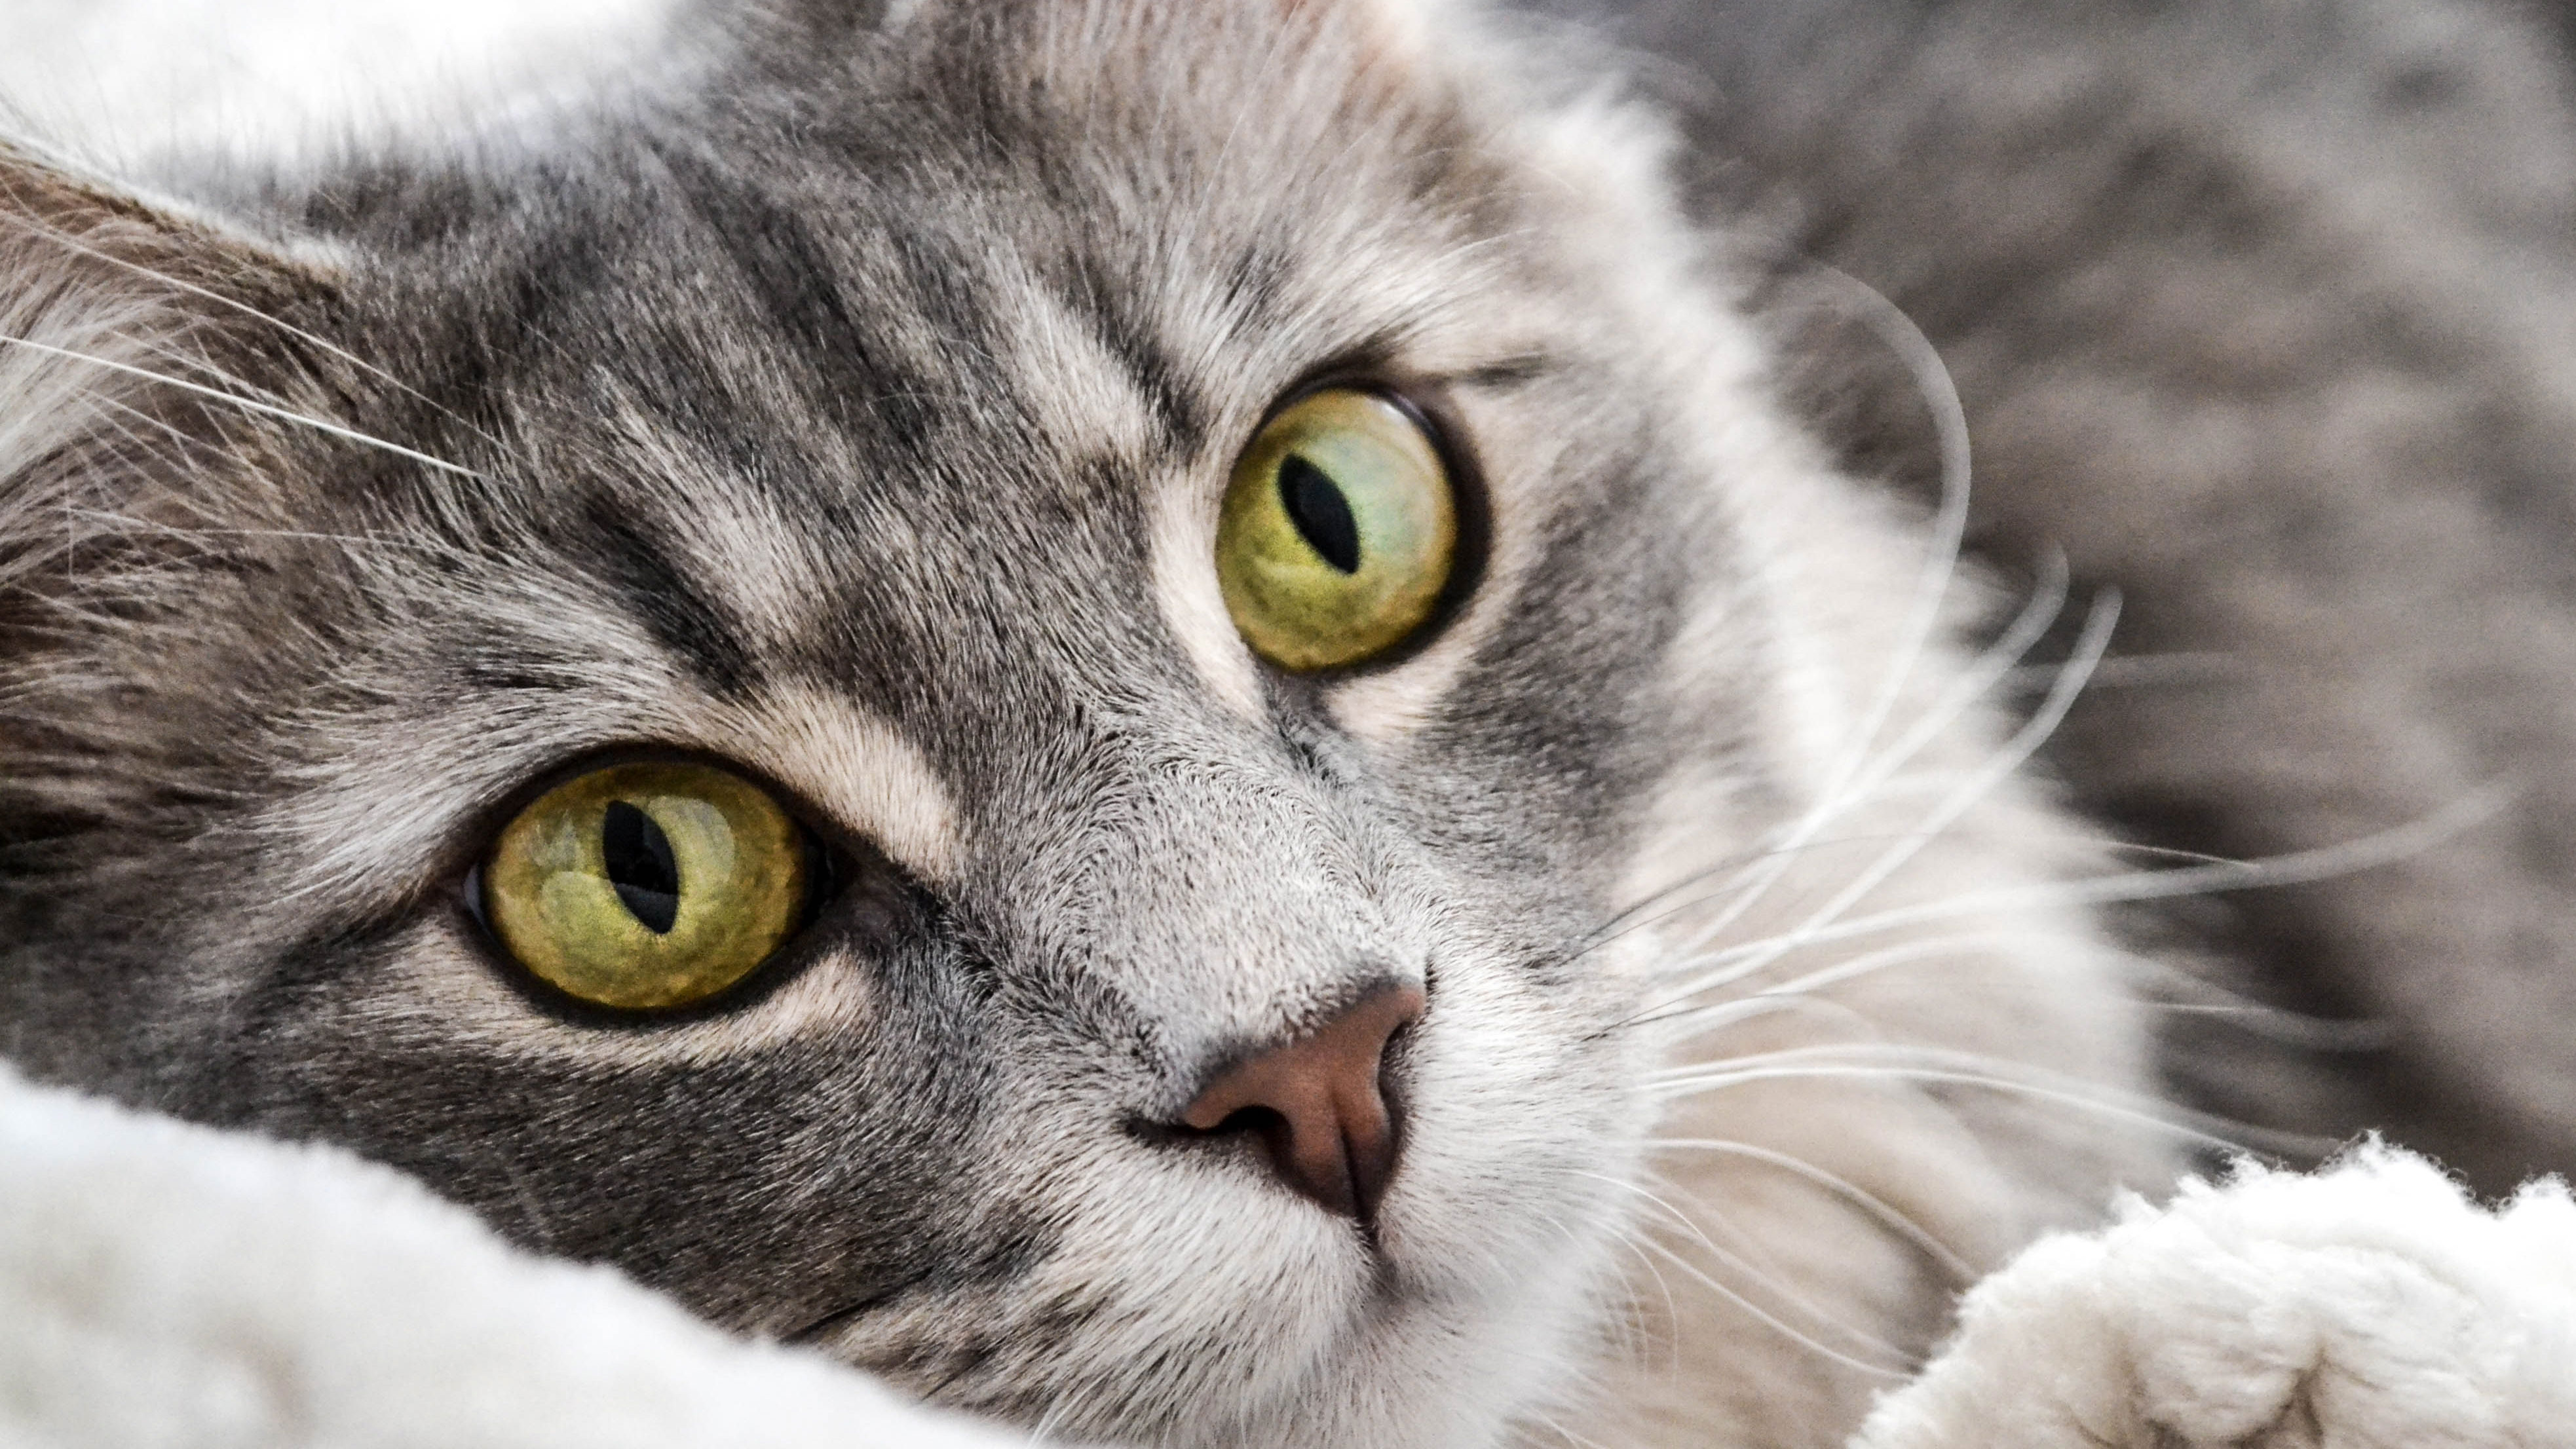 Close up of a cat's face, focusing on the eyes